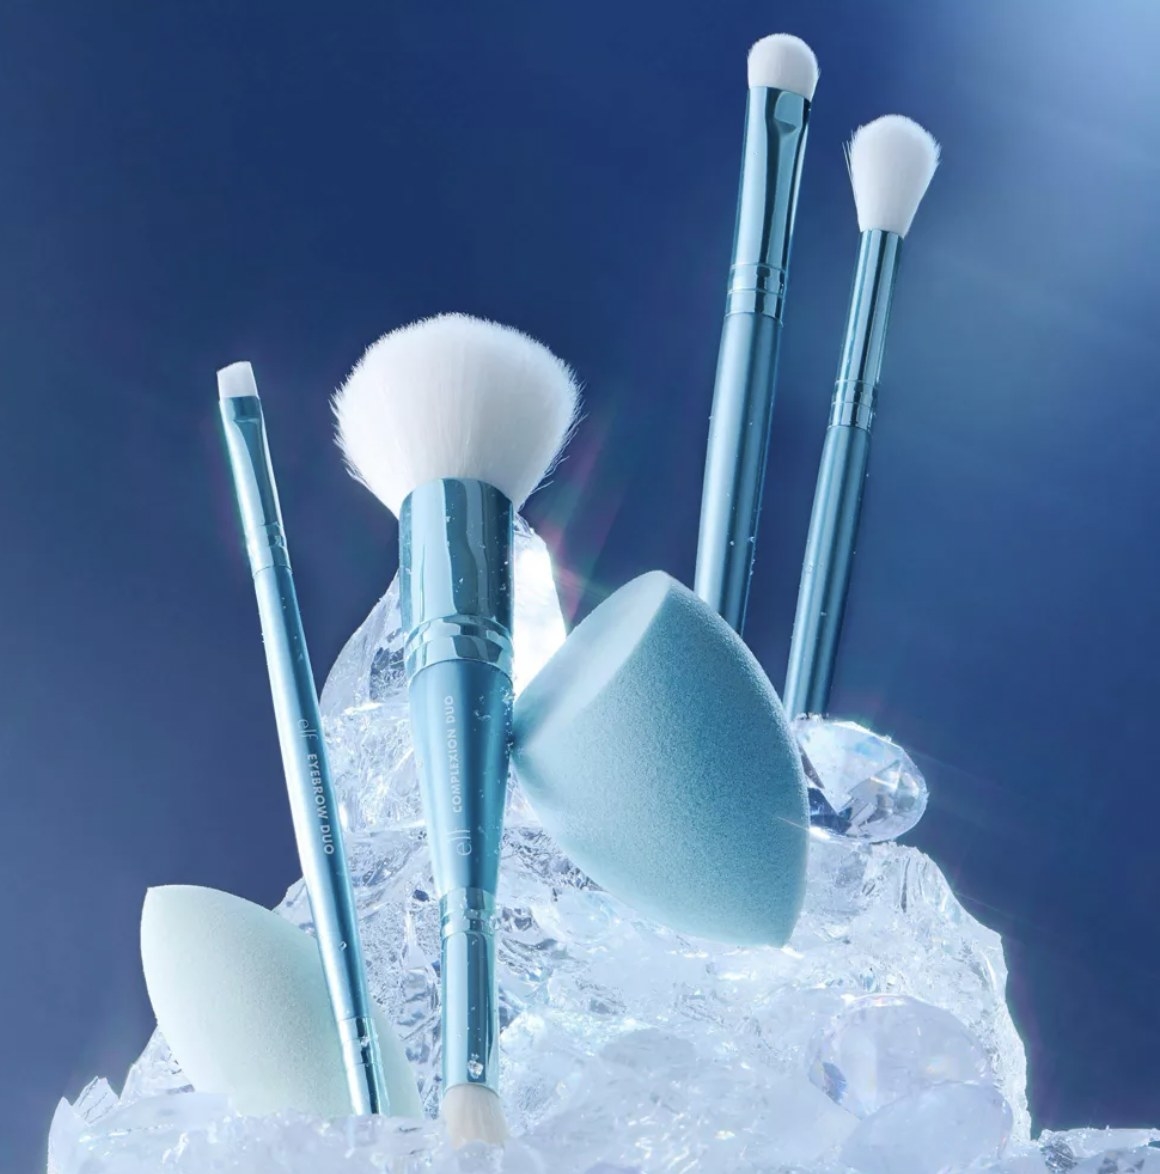 the six-piece makeup tools on ice